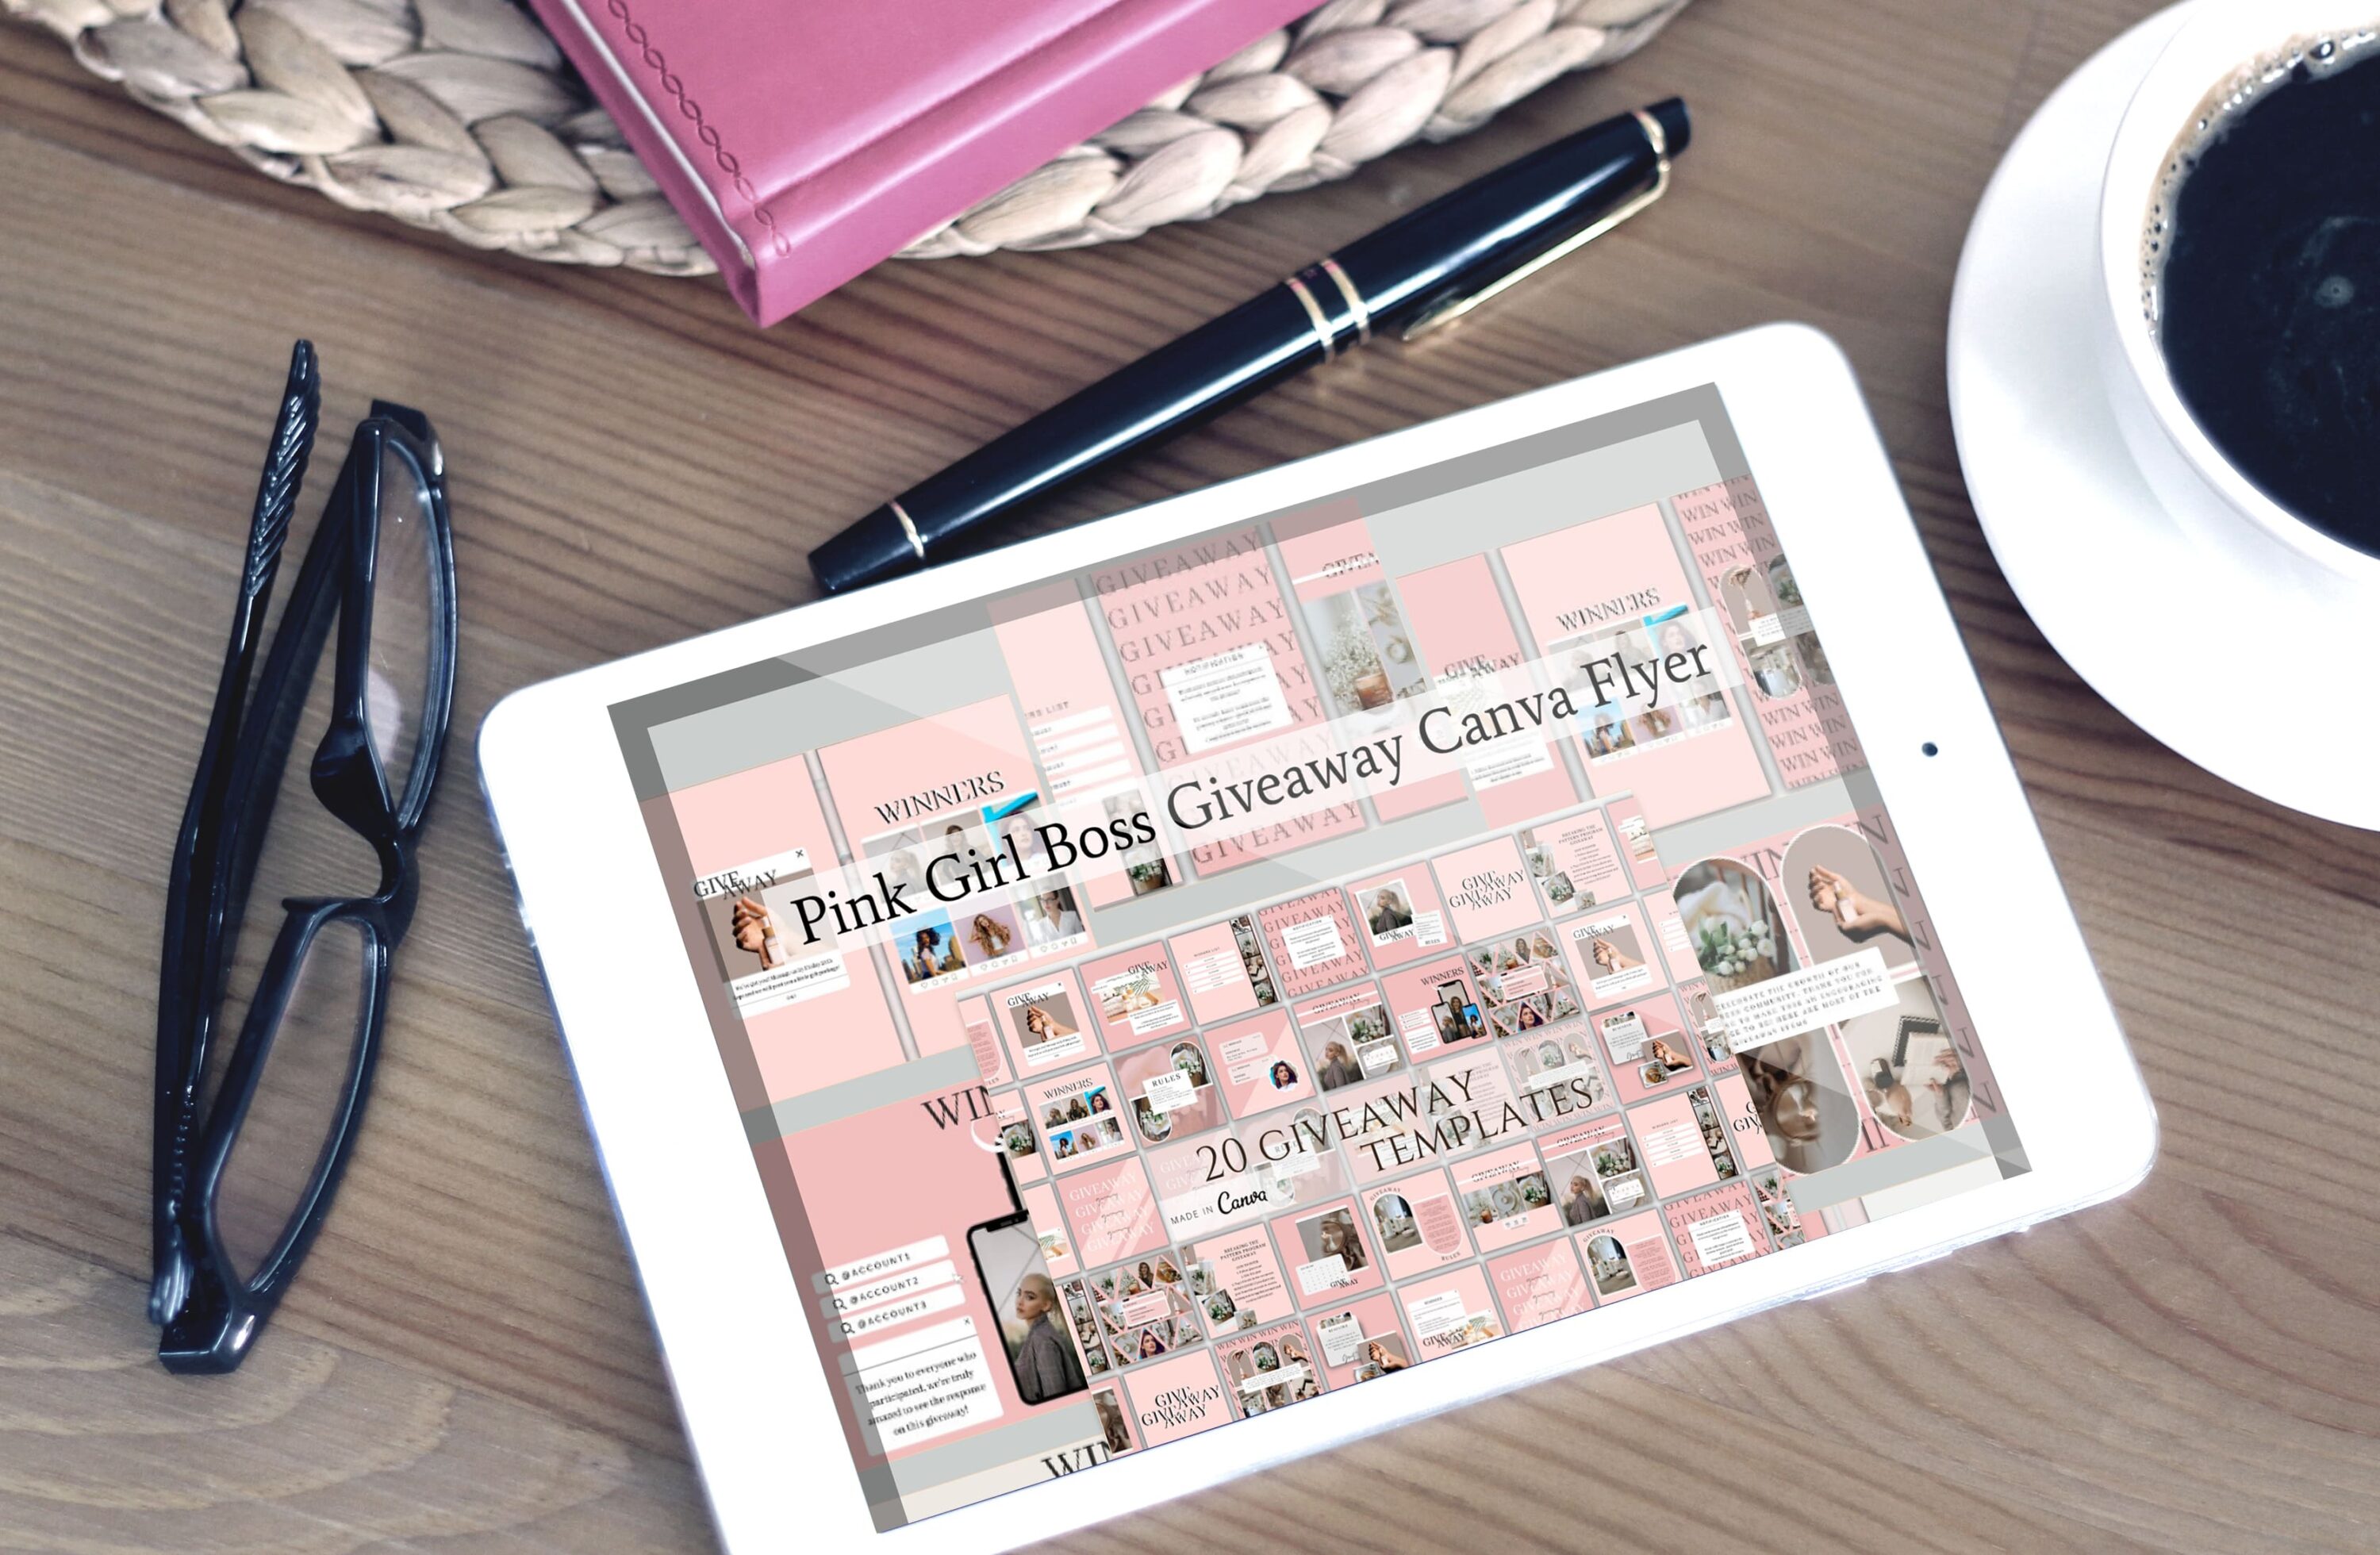 Tablet option of the Pink Girl Boss Giveaway Canva Flyer.